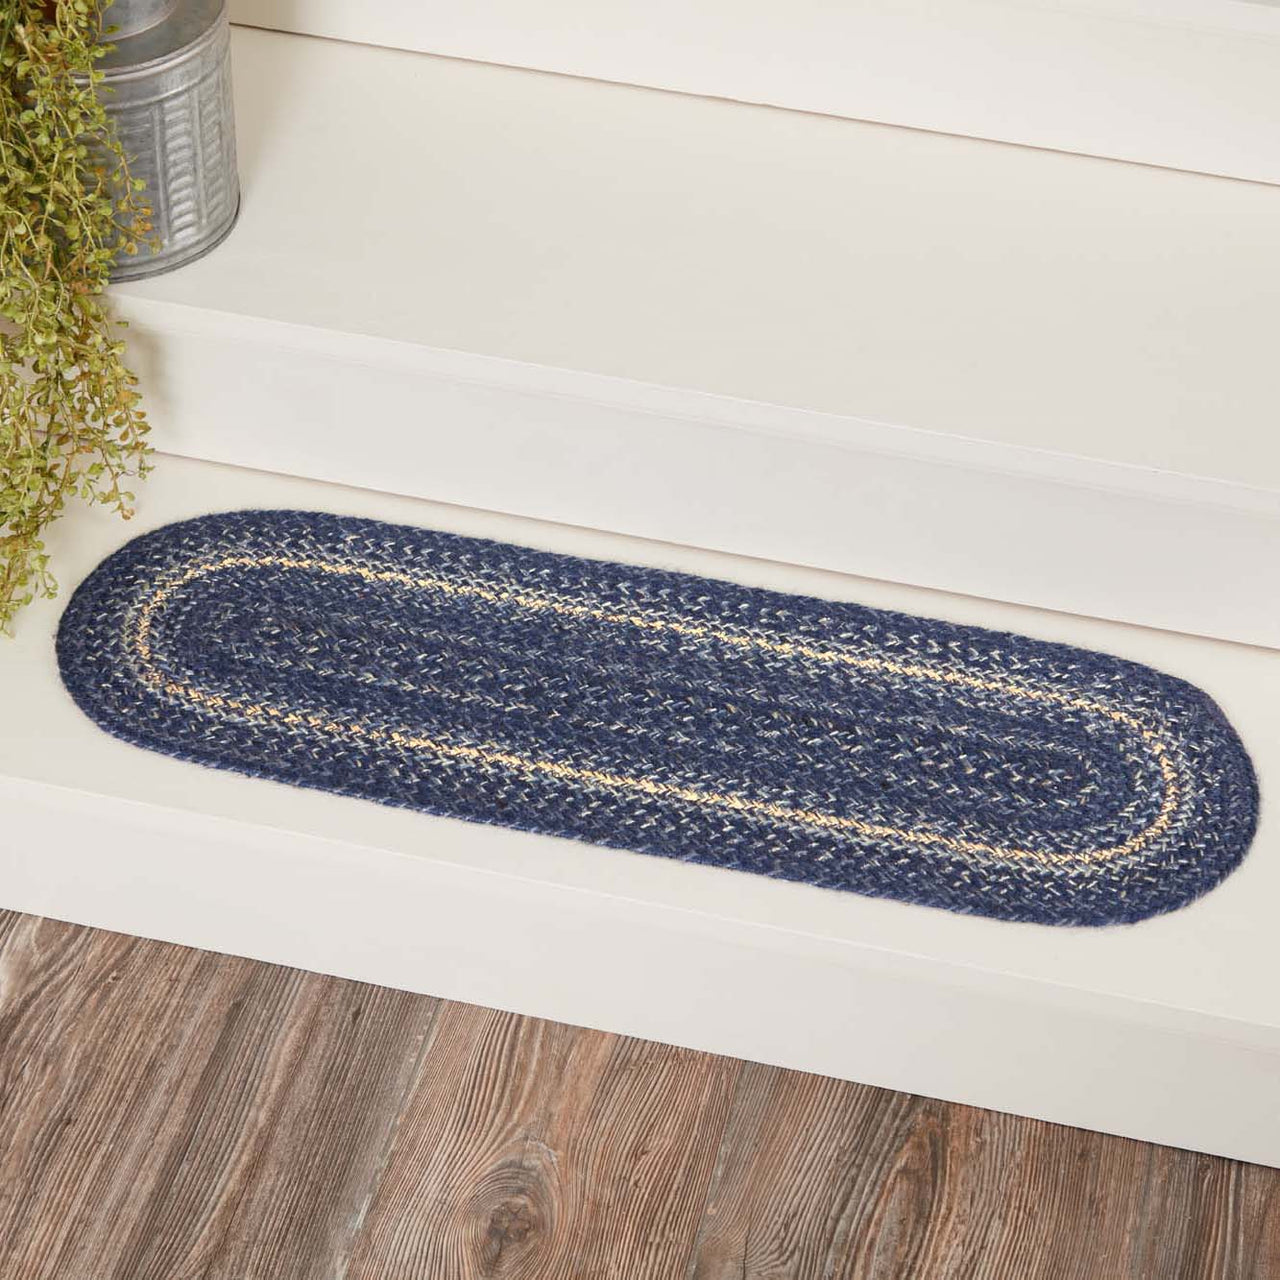 Great Falls Blue Jute Stair Tread Oval Latex 8.5x27 VHC Brands